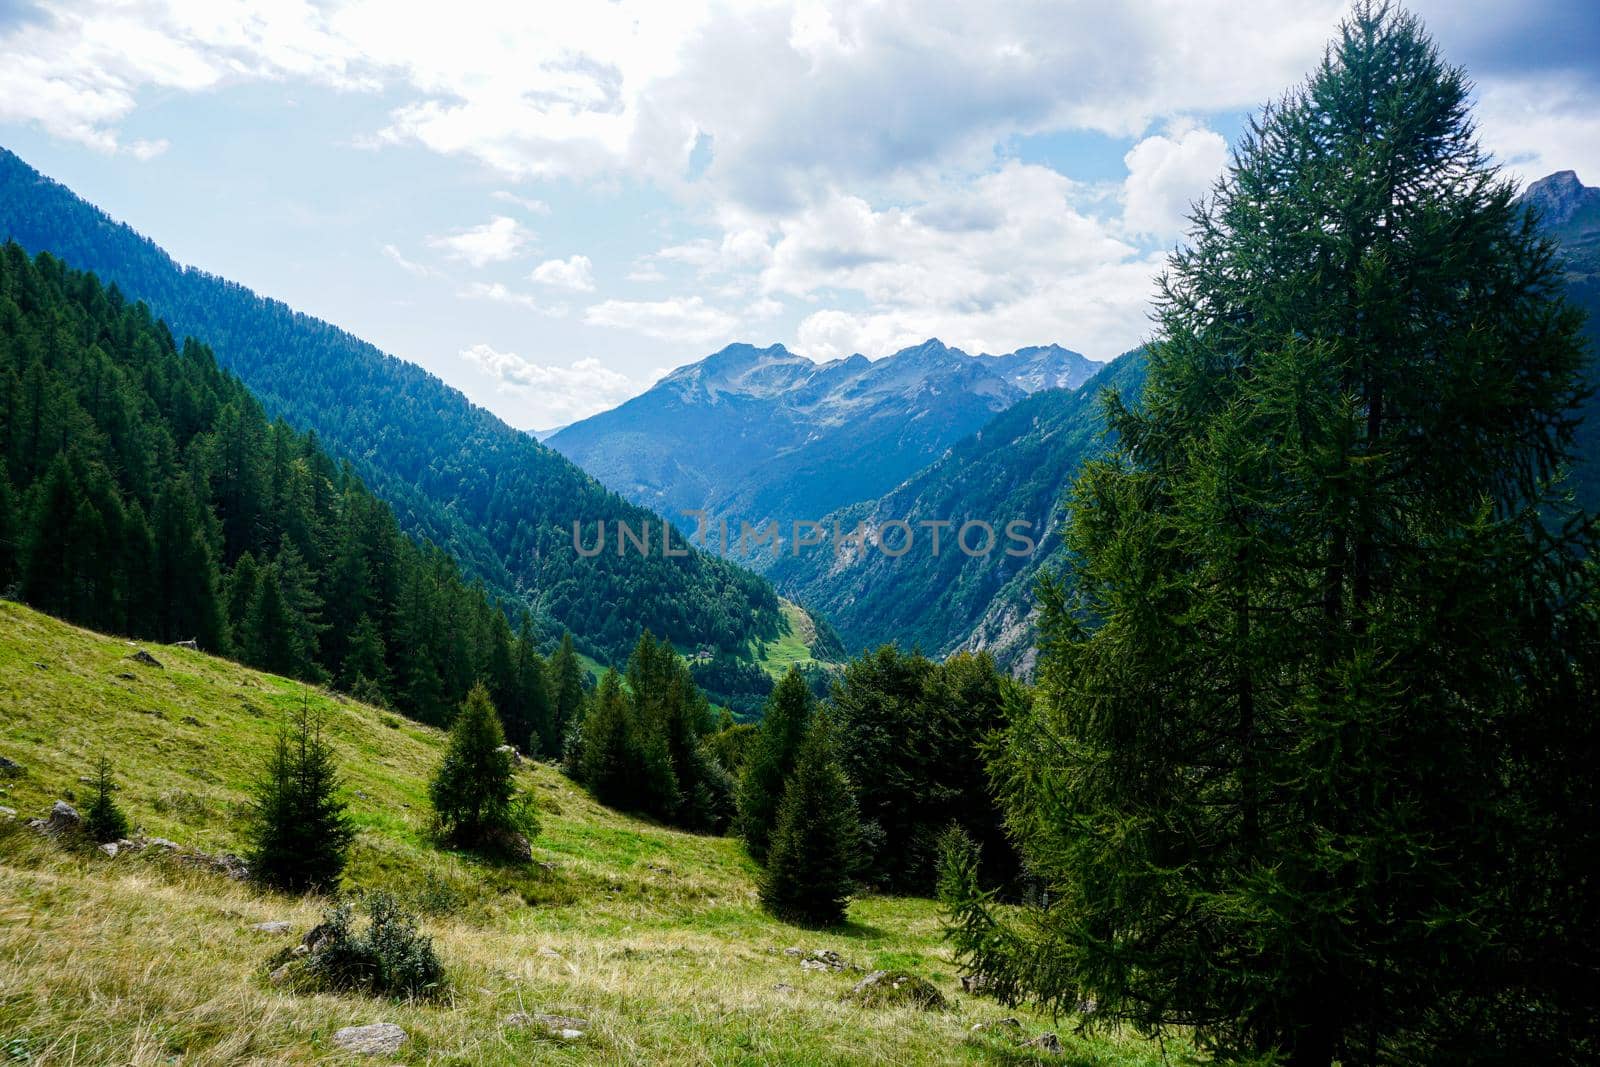 Beautiful view over the Lavizzara valley near Fusio, Switzerland by pisces2386